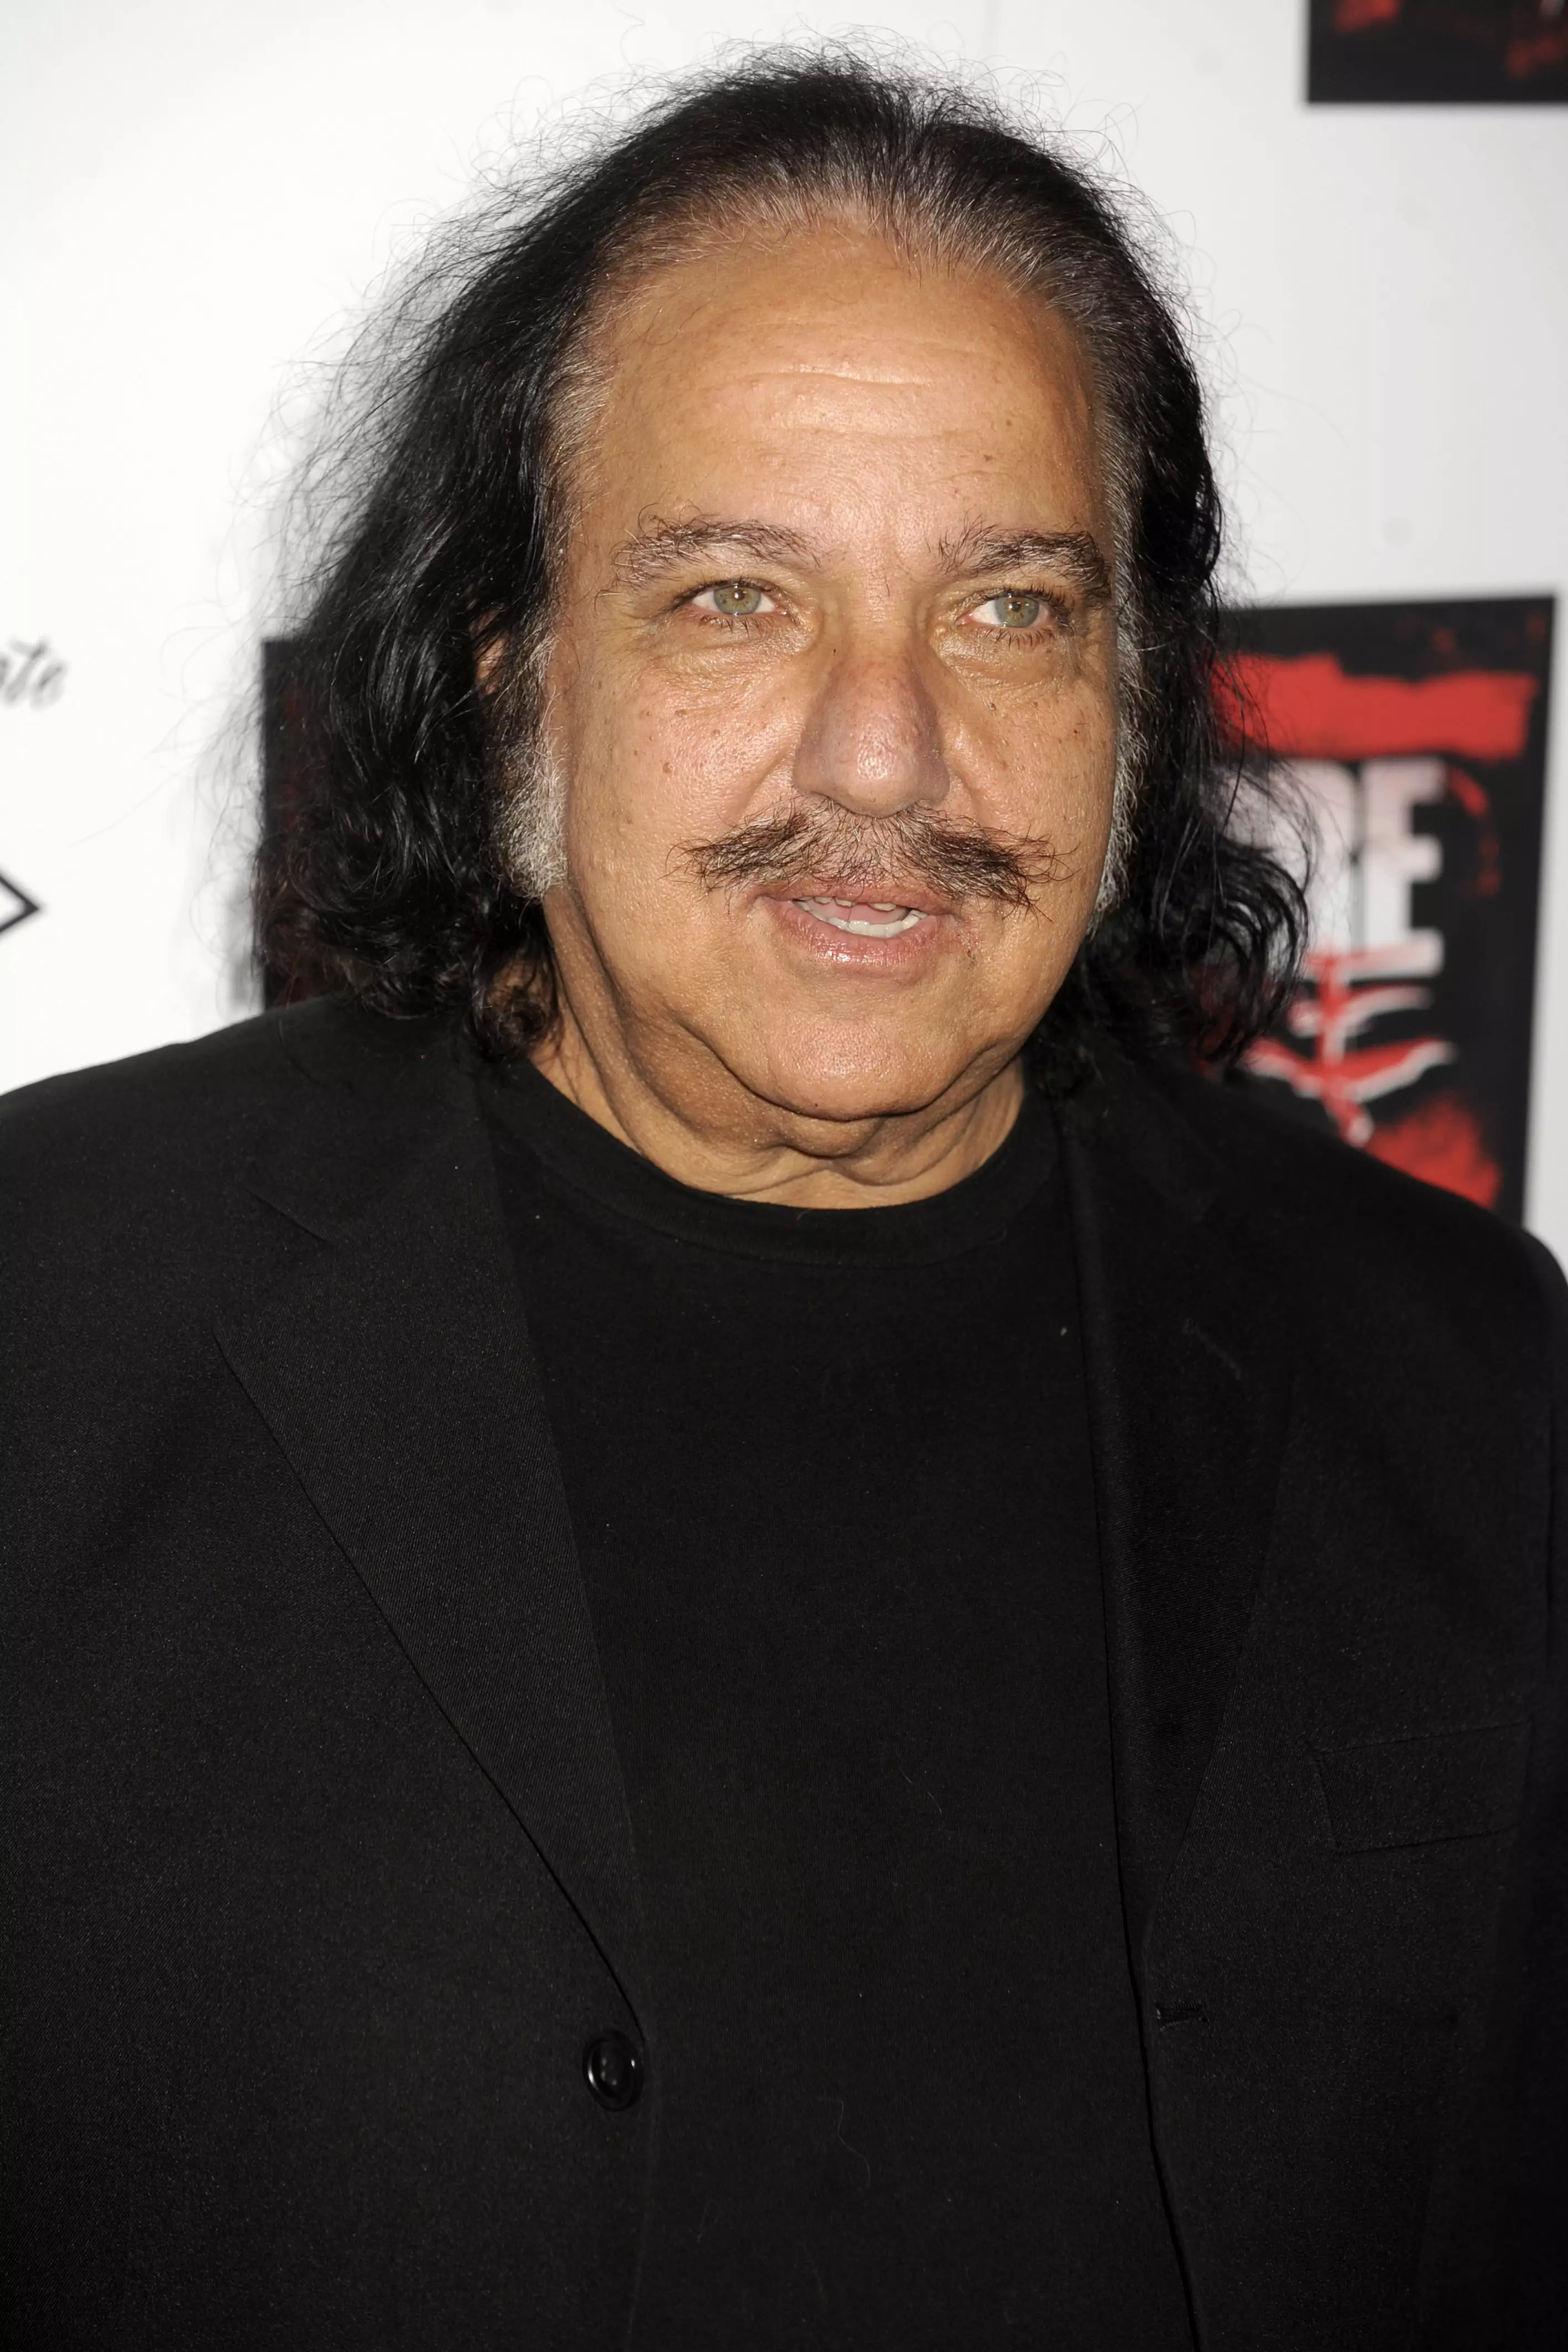 Ron Jeremy, pictured in 2014.